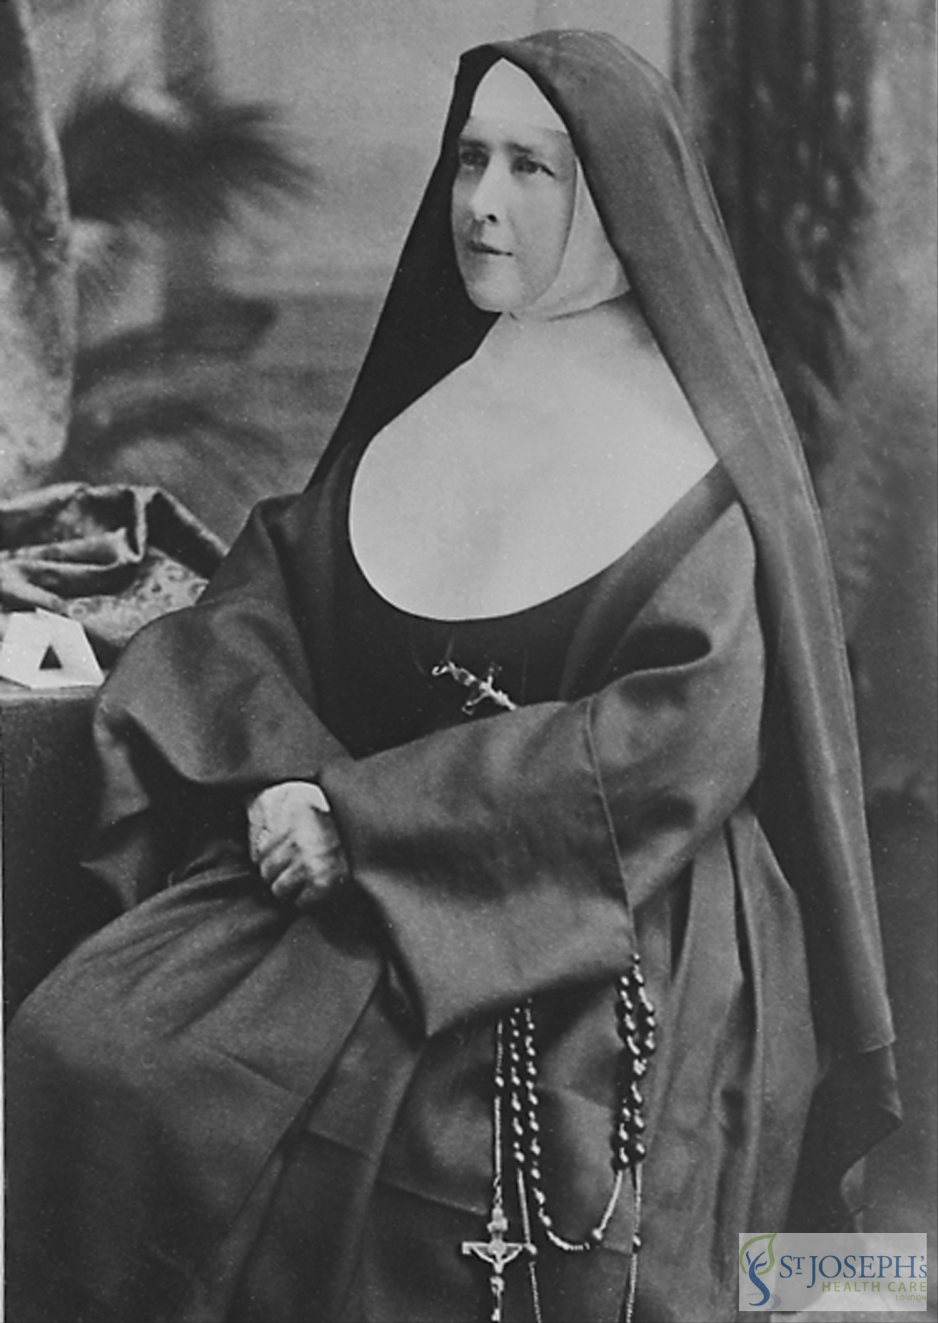 Reverend Mother Ignatia Campbell founded both Mount Hope and St. Joseph’s Hospital in the 1800s.